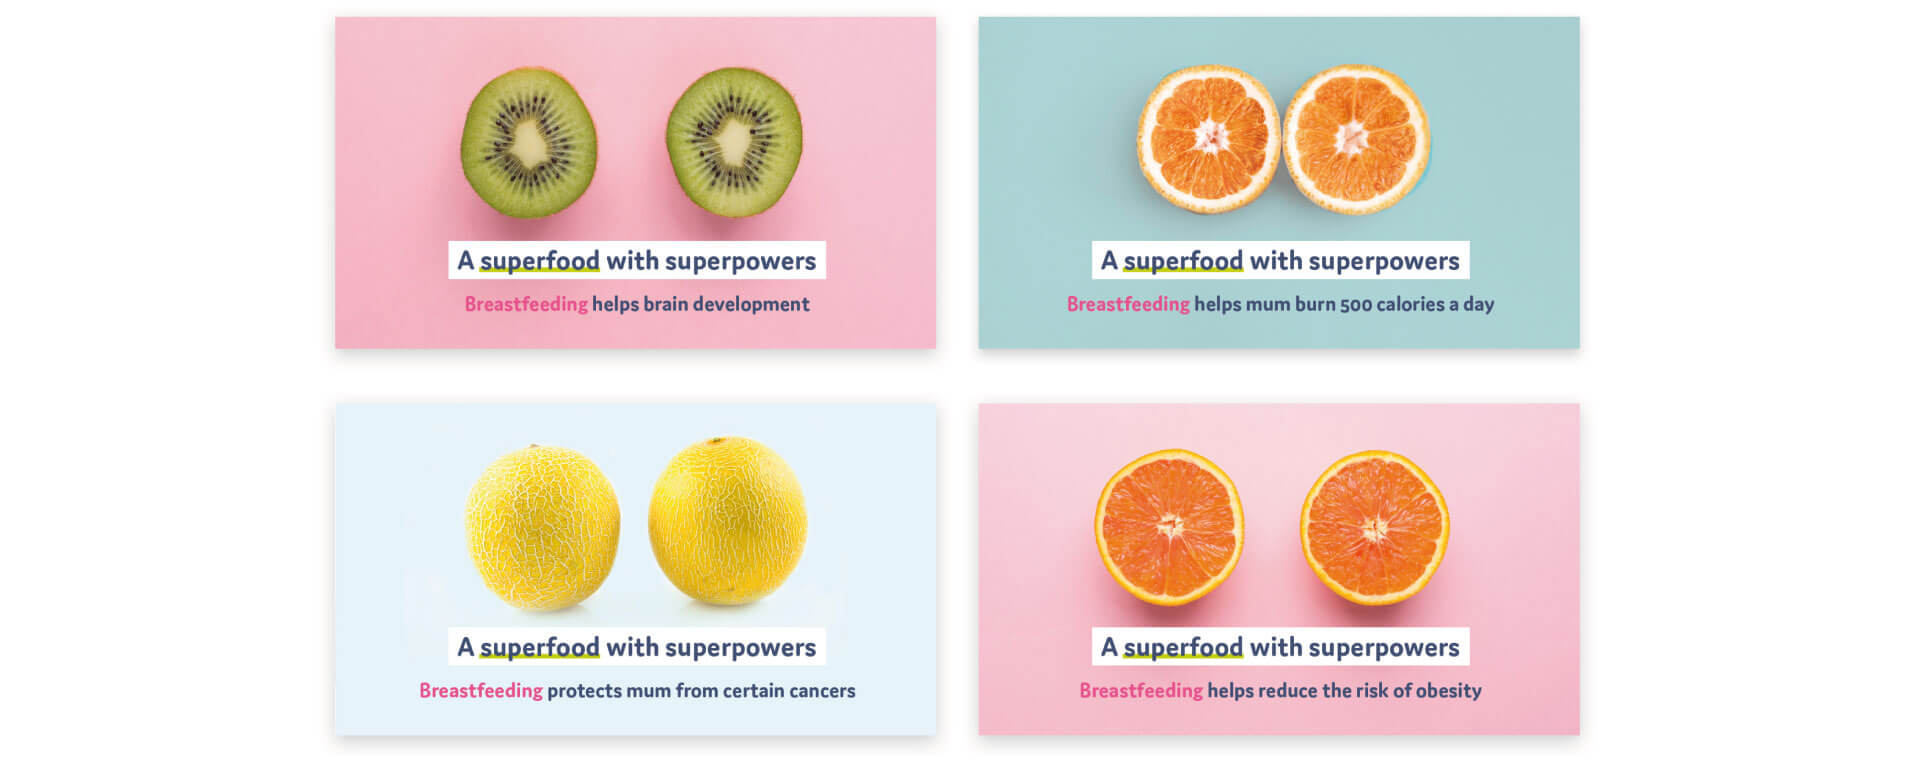 Four images of fruit positioned to resemble breasts and information around breastfeeding.